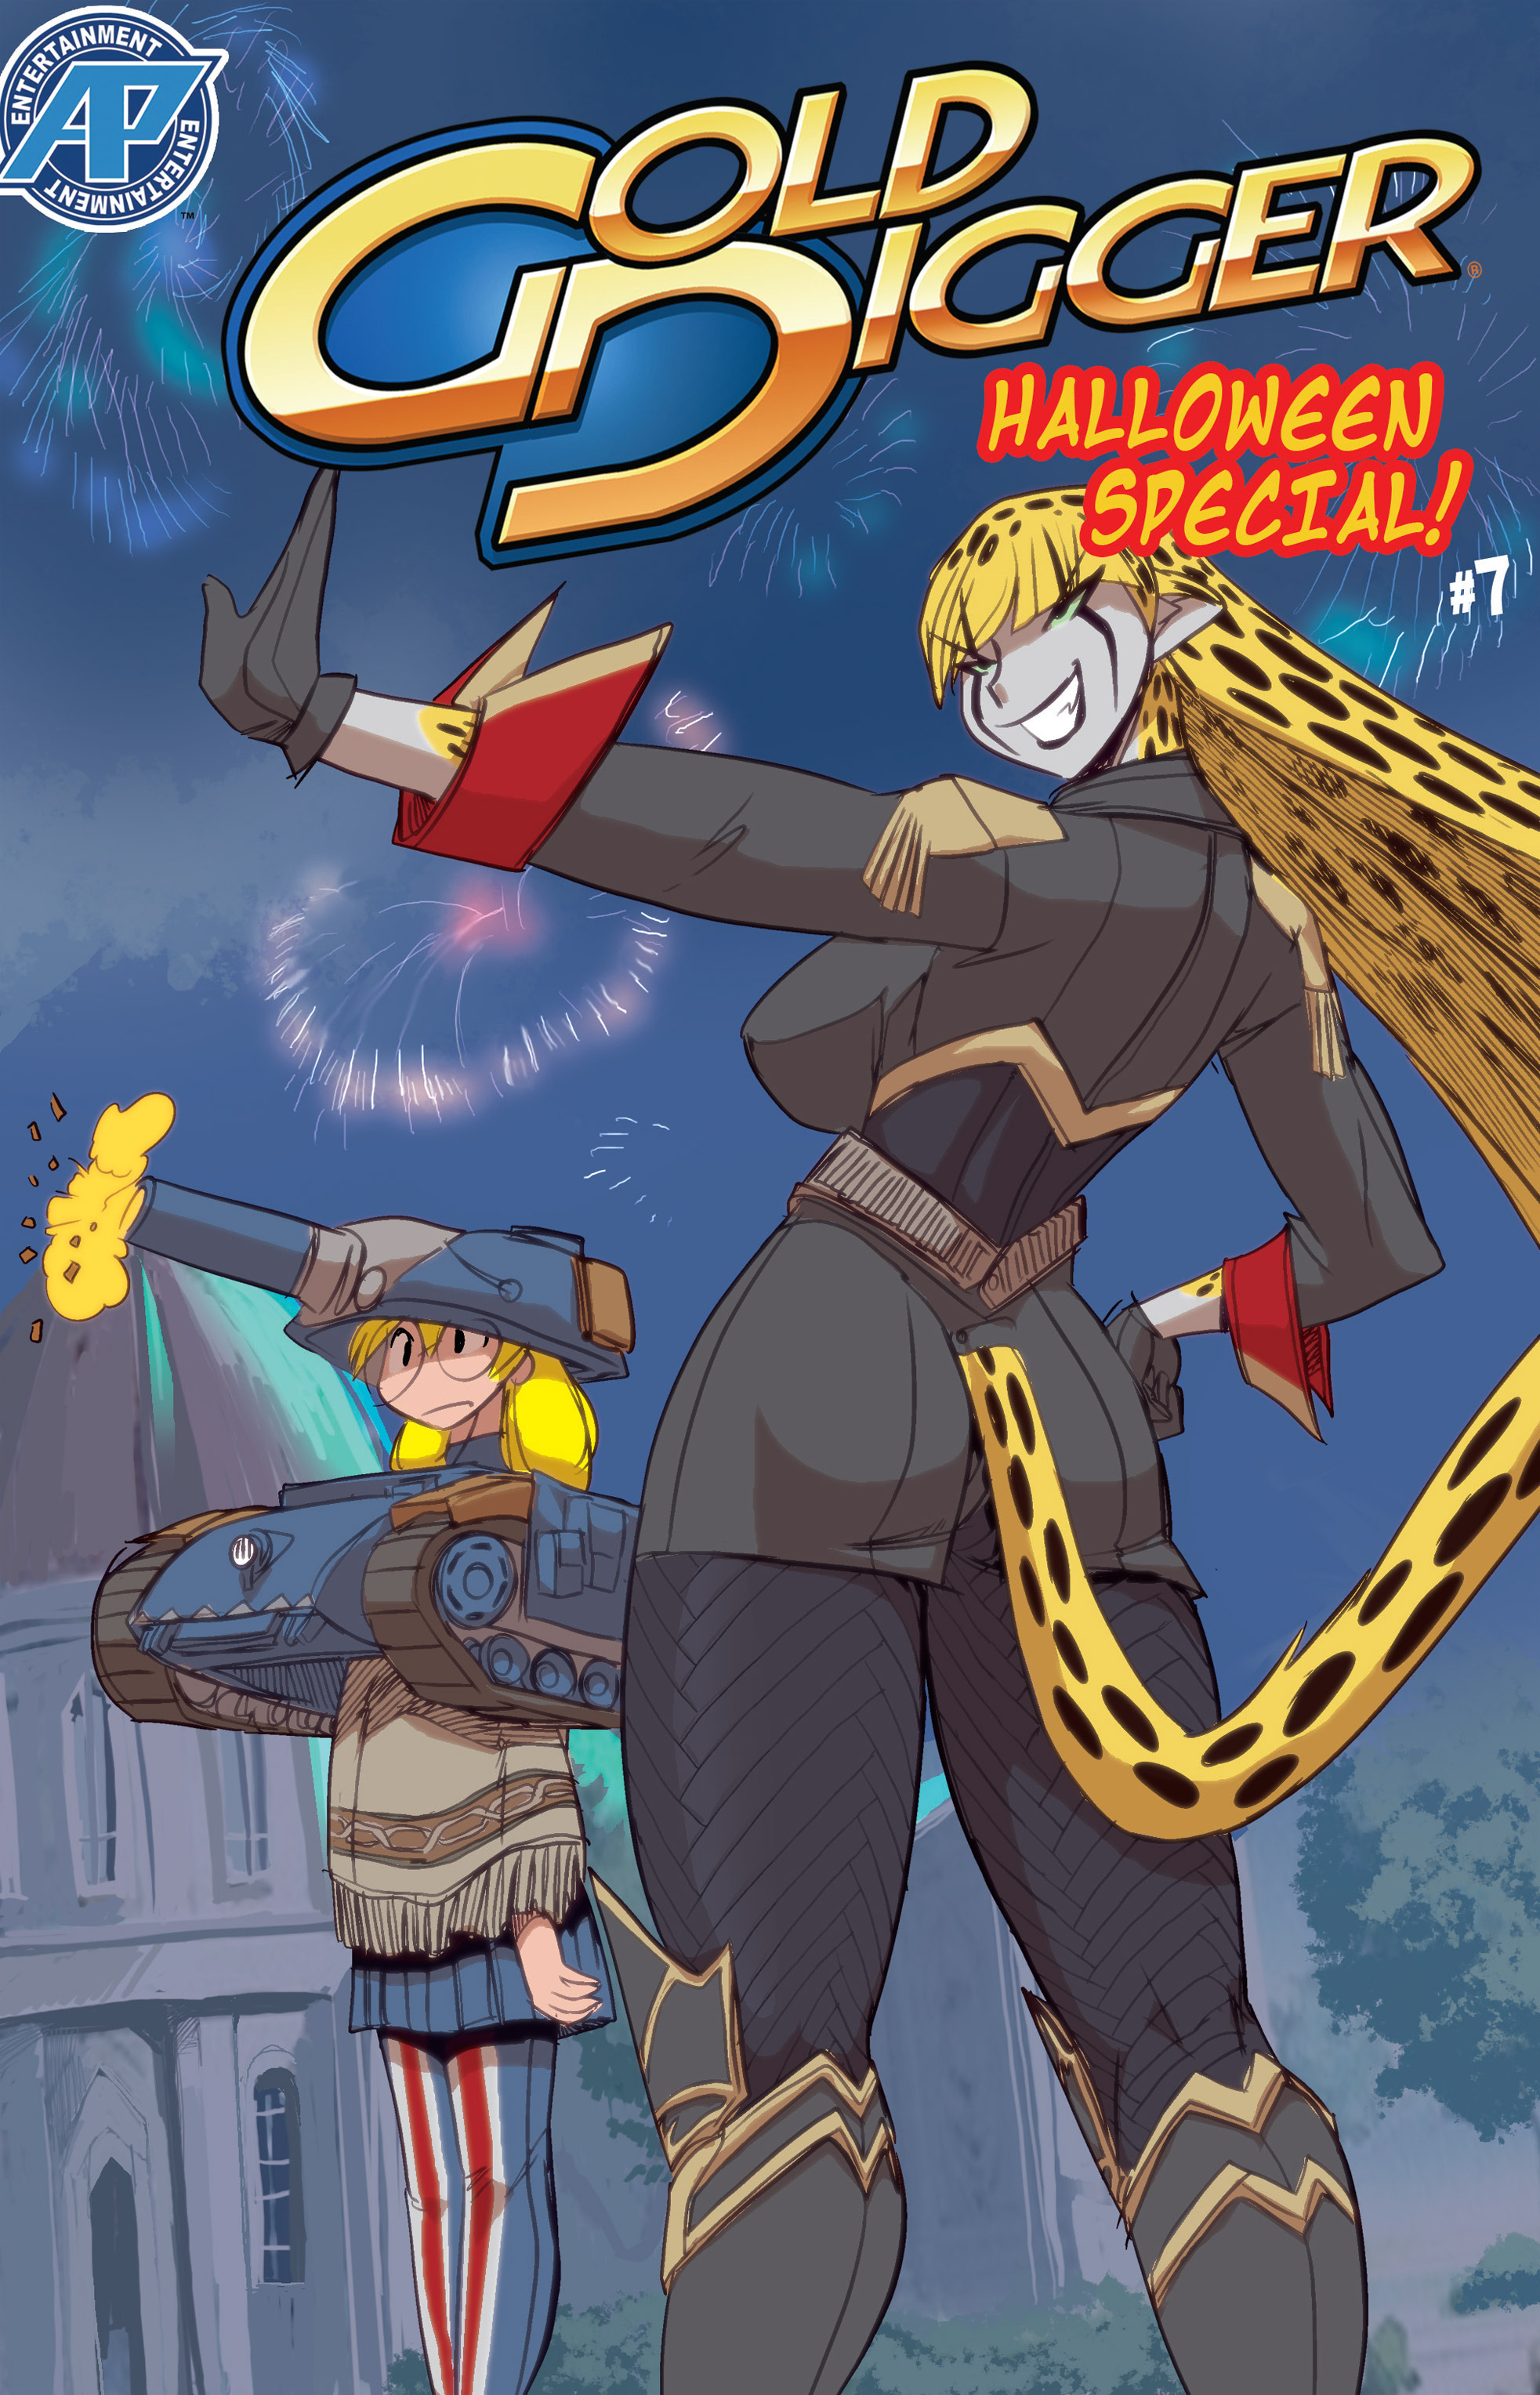 Read online Gold Digger Halloween Special comic -  Issue #7 - 1